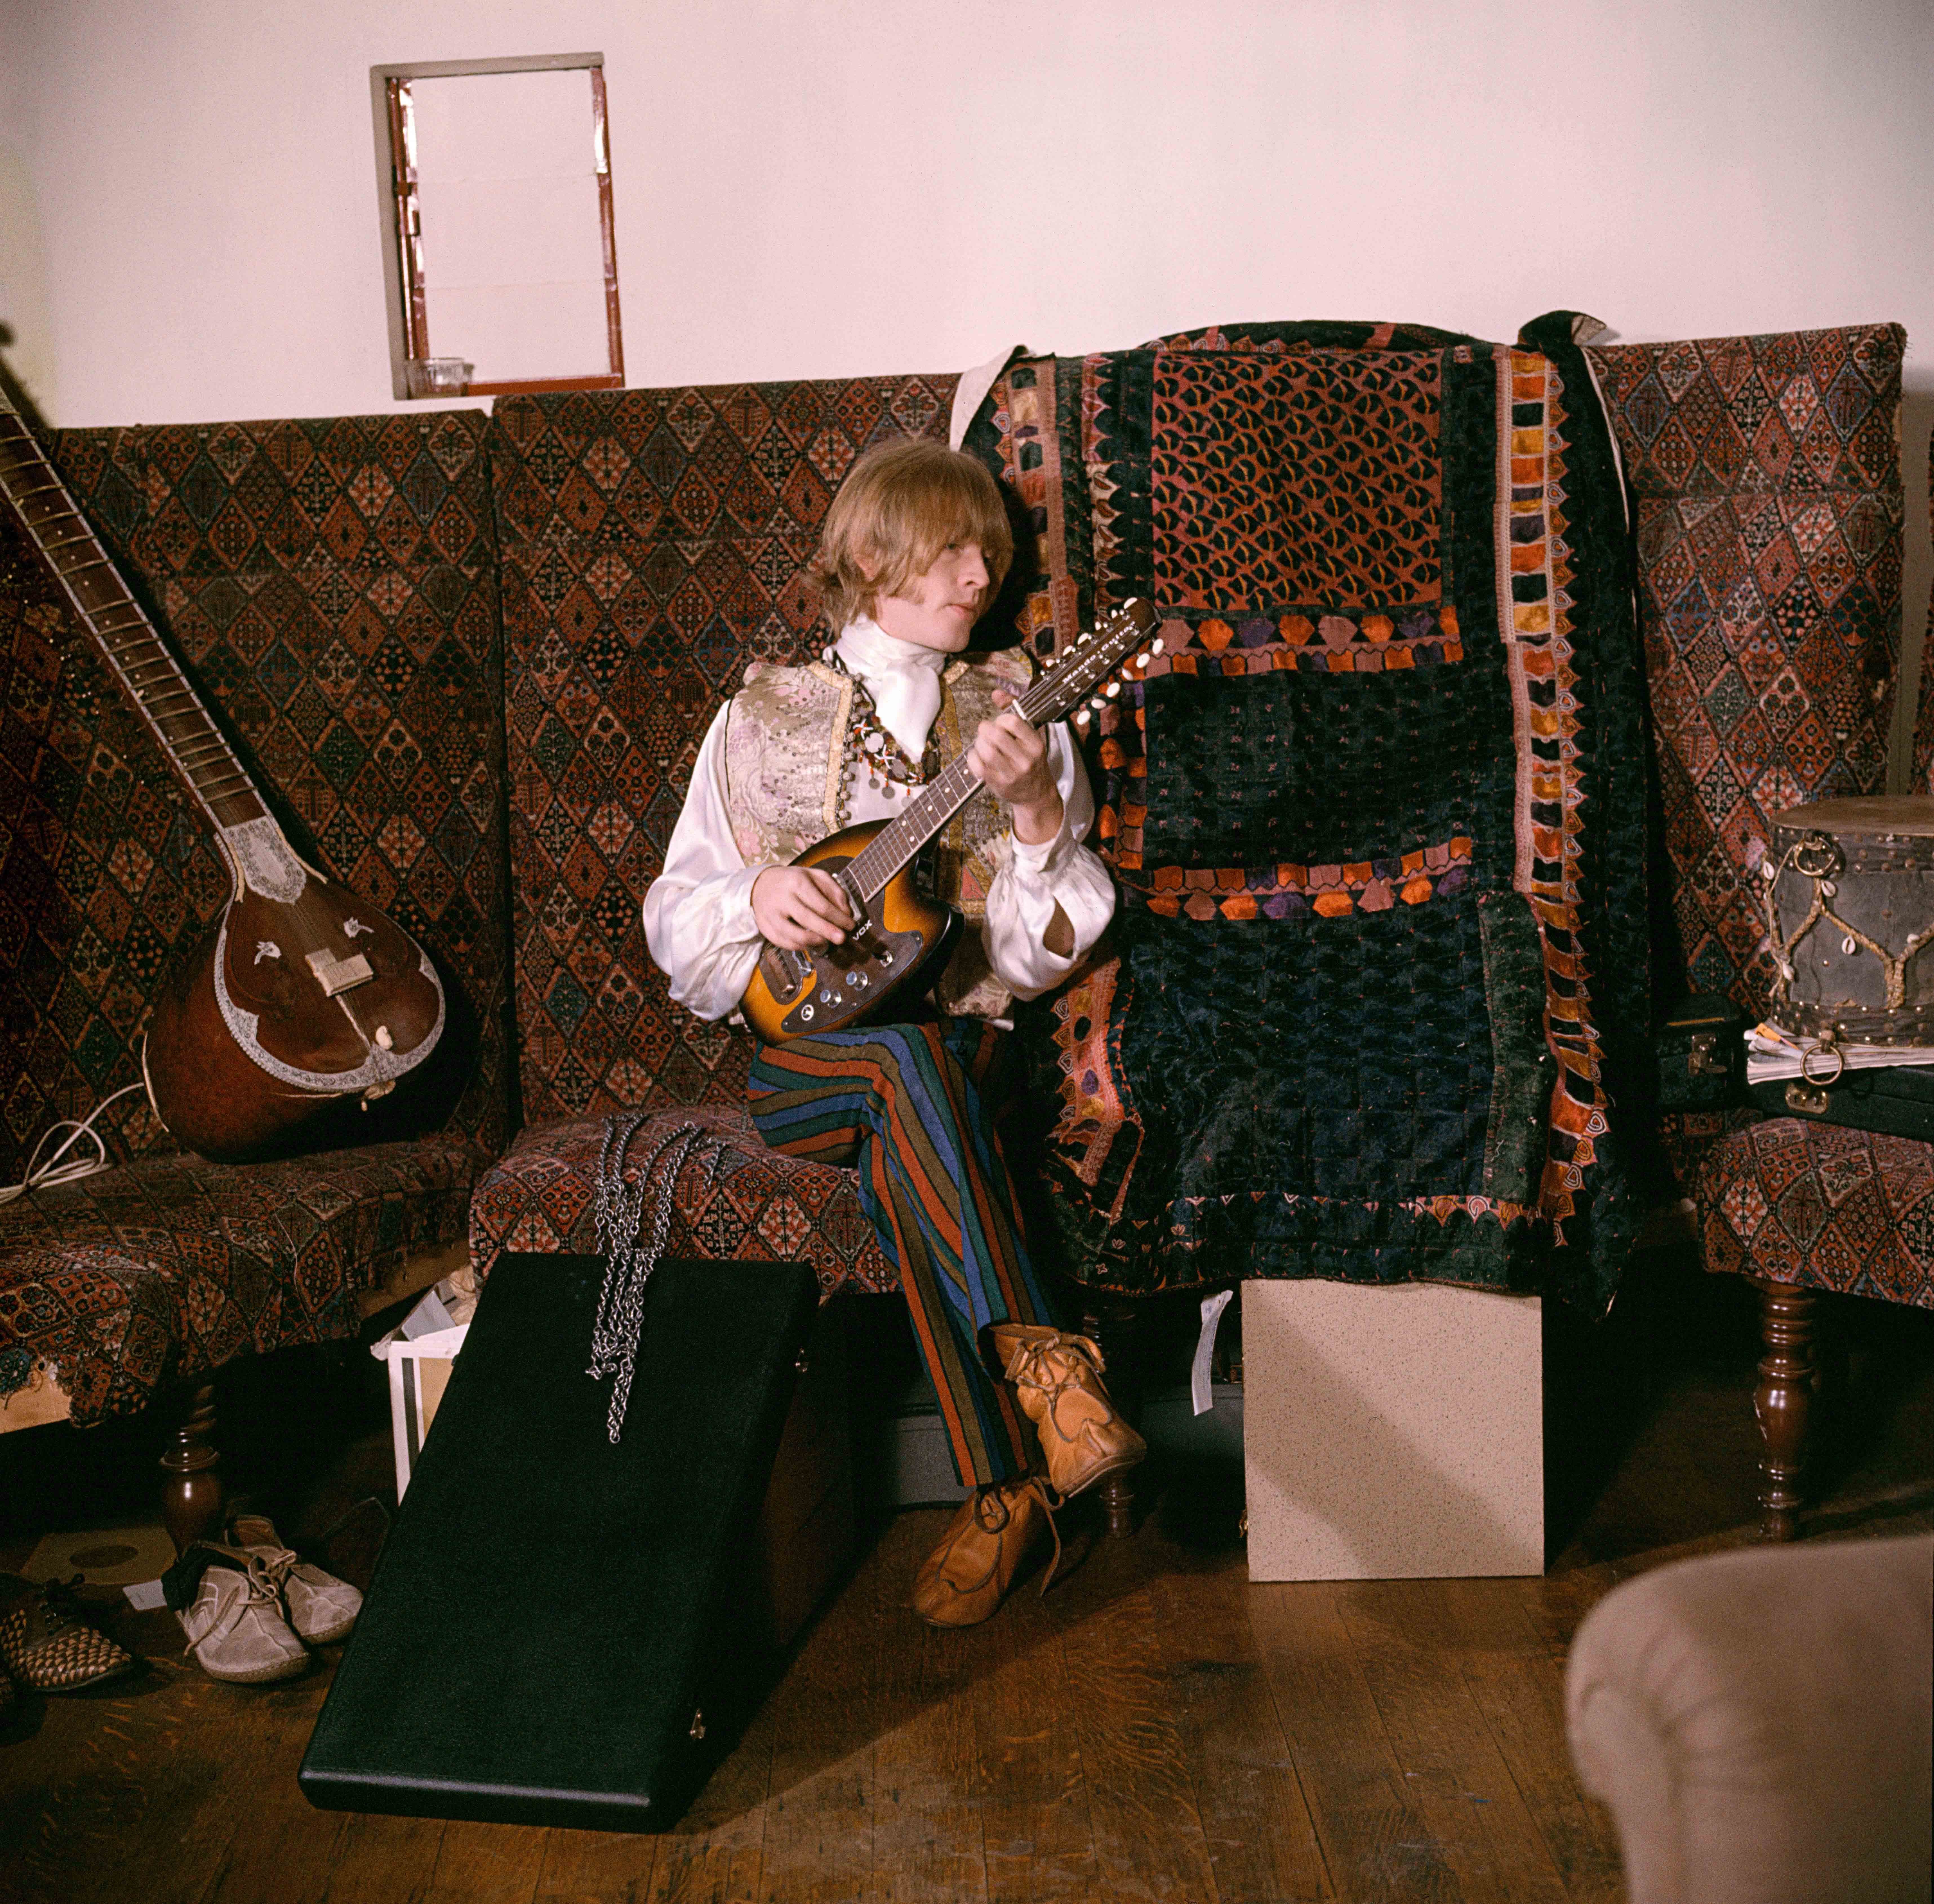 Brian Jones at home on a settee. Courtfield Gardens, South Kensington